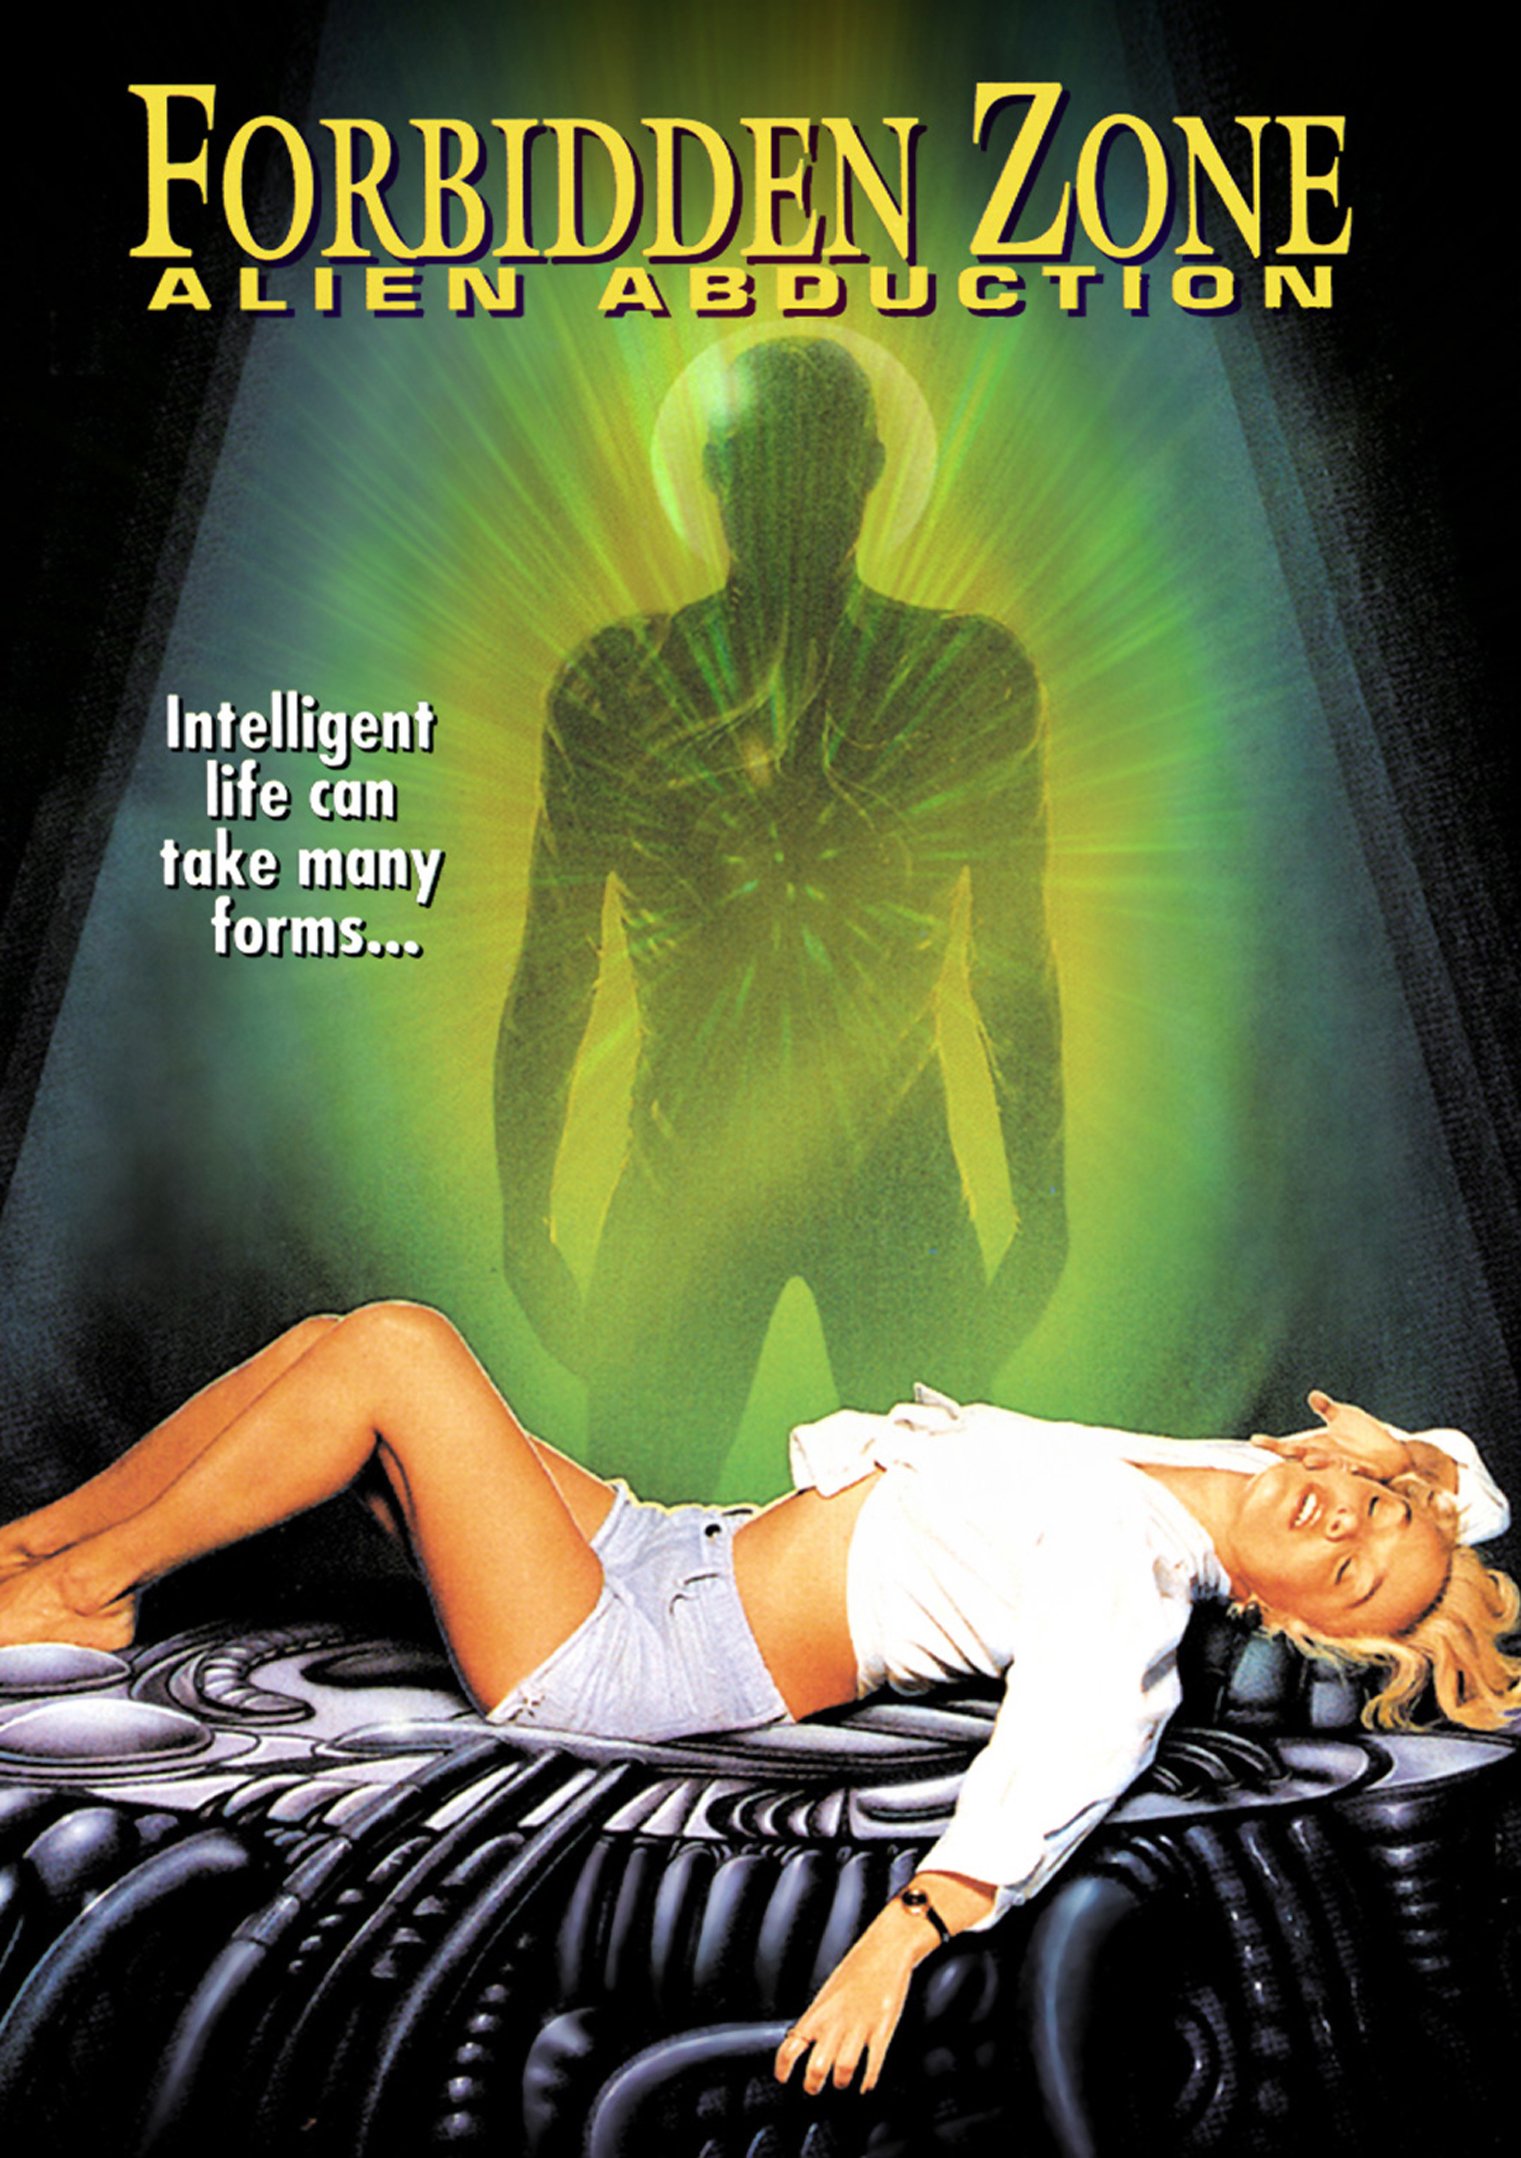 chrystina connors recommends Alien Abduction Sex Videos